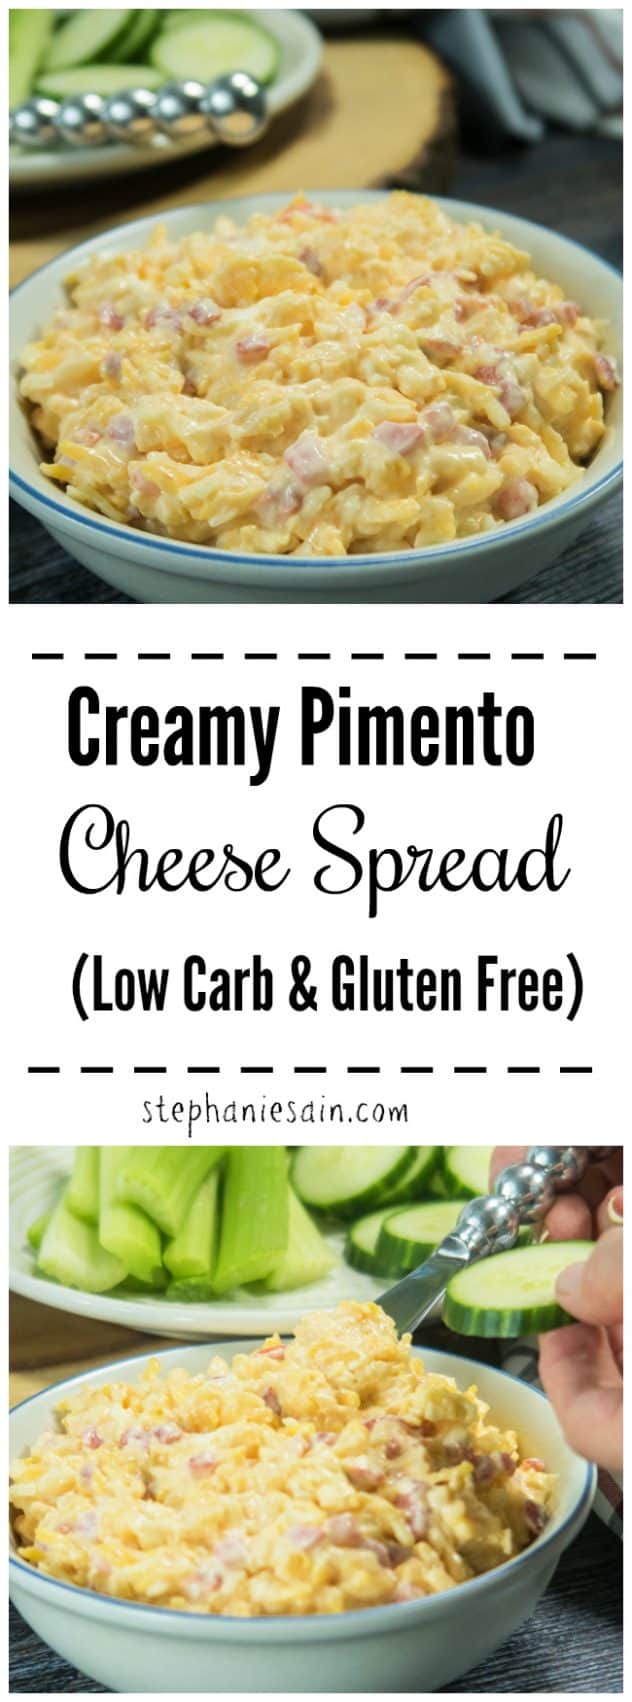 This Creamy Pimento Cheese Spread is perfect with veggies, chips, crackers, & so much more. Perfect on a sandwich for a quick easy lunch or even delicious topped on a burger. Low Carb & Gluten Free.